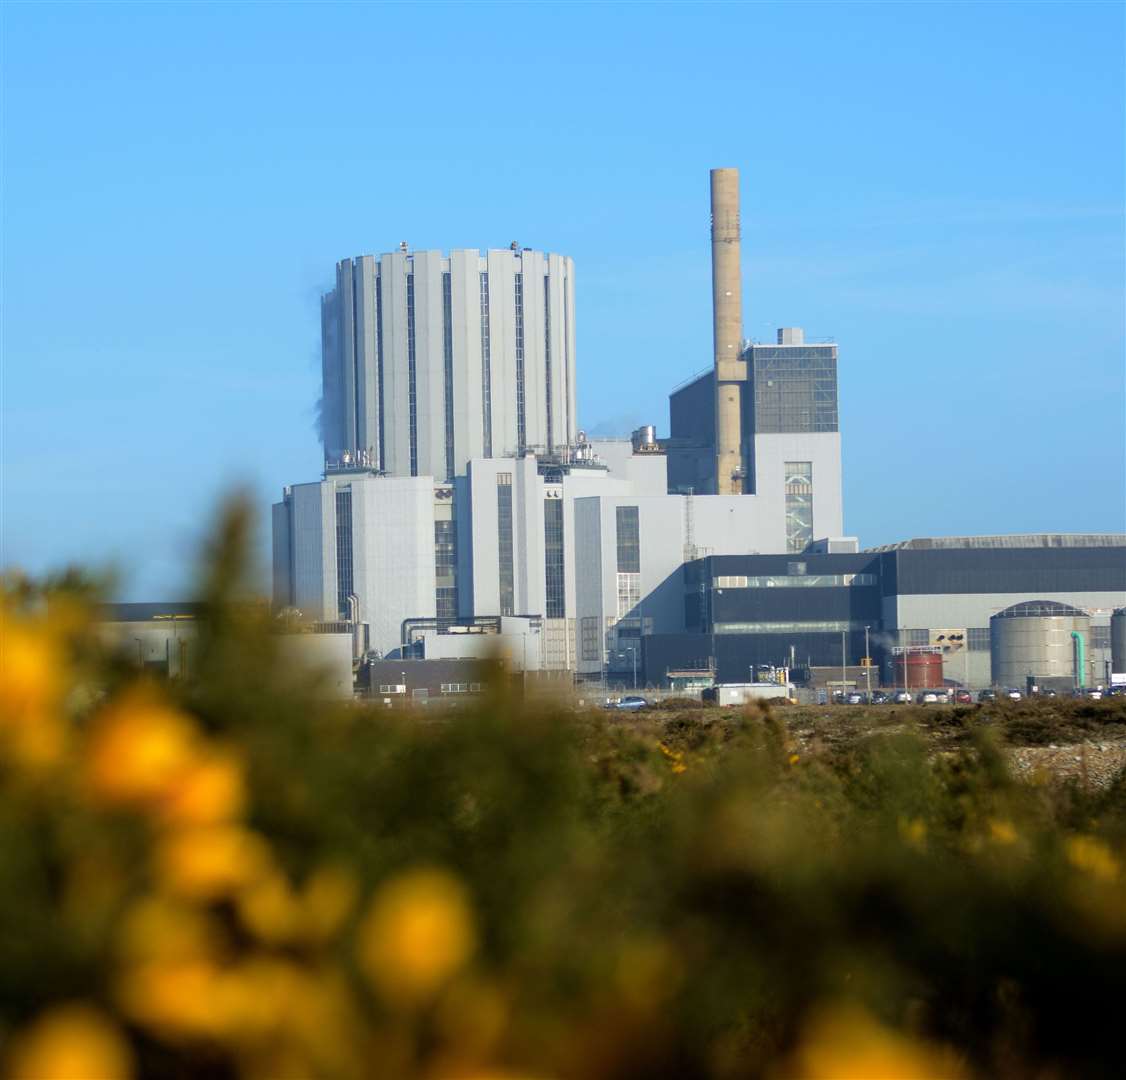 Dungeness B nuclear power station